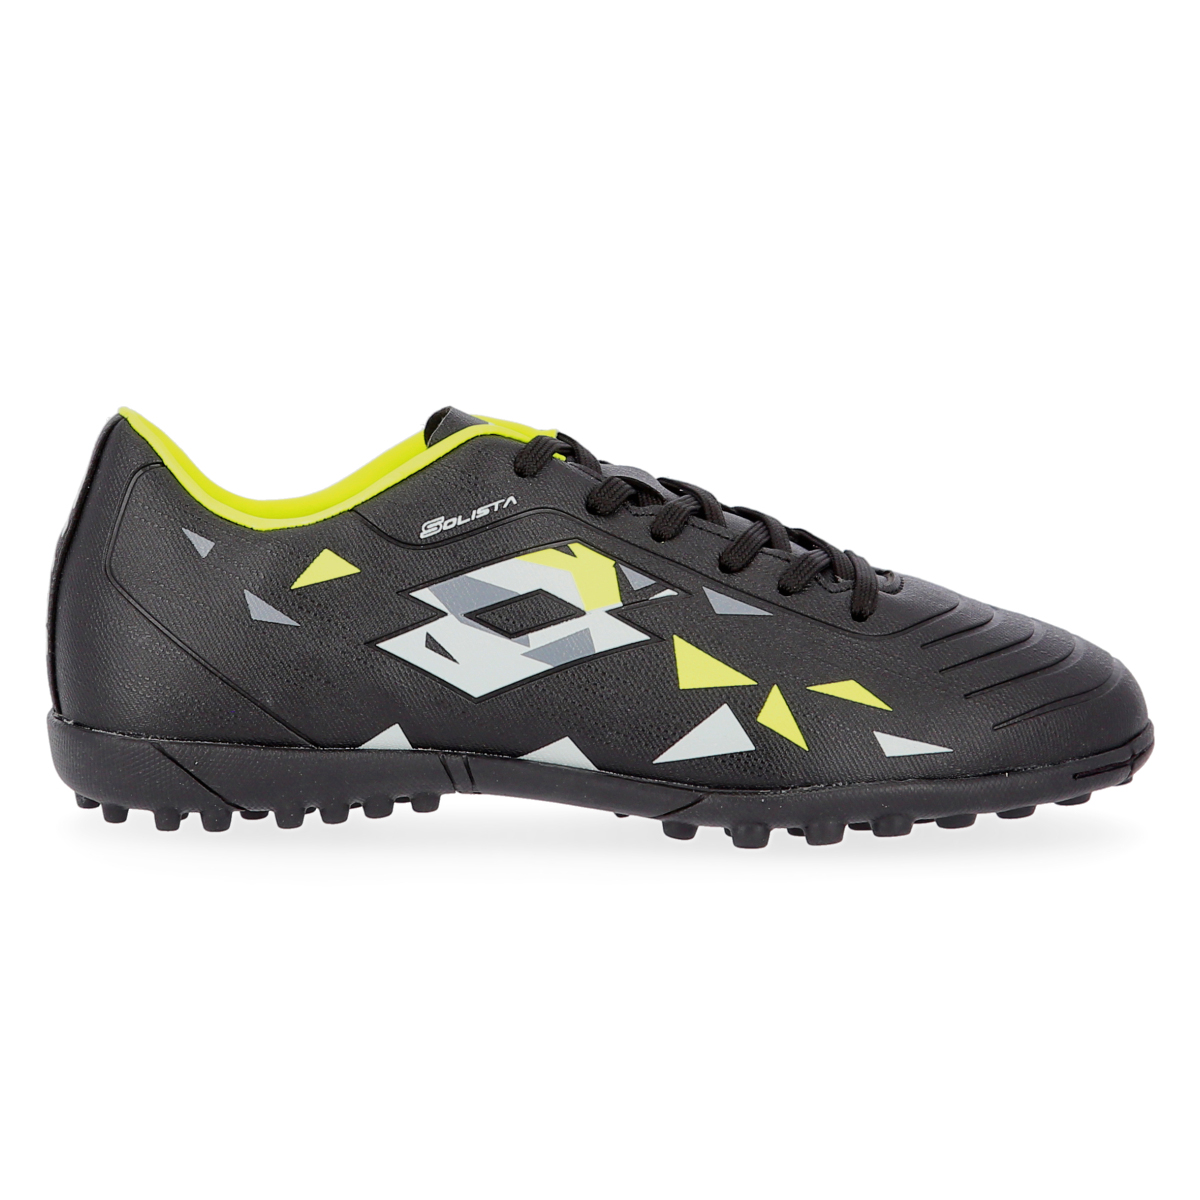 Botines Fútbol Lotto Solista 700 V Tf Hombre,  image number null